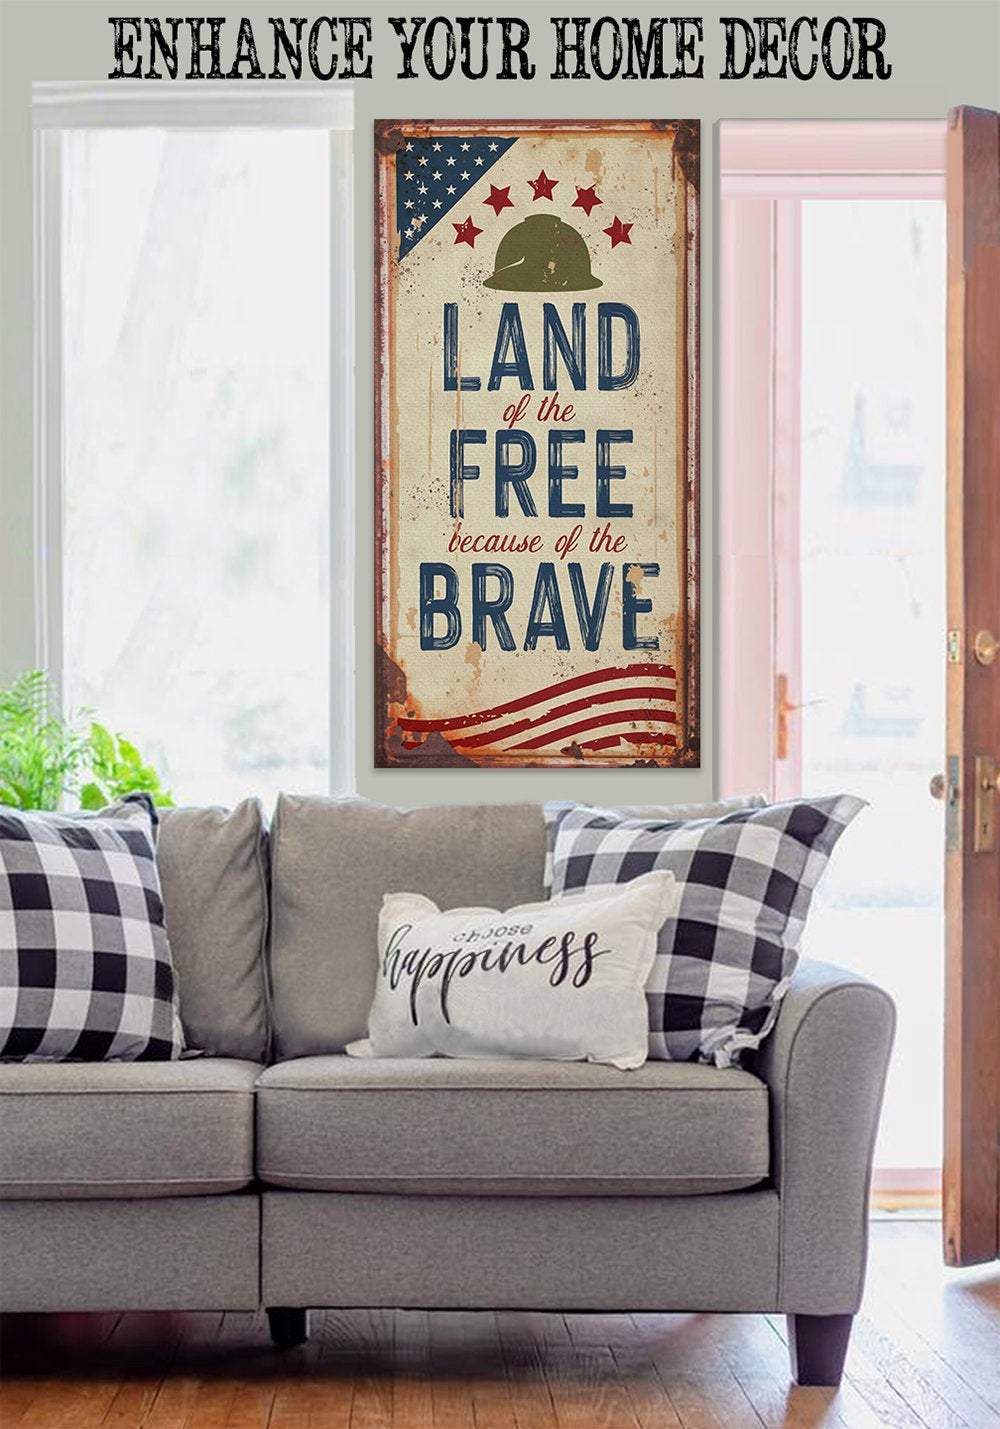 Land of The Free - Canvas | Lone Star Art.